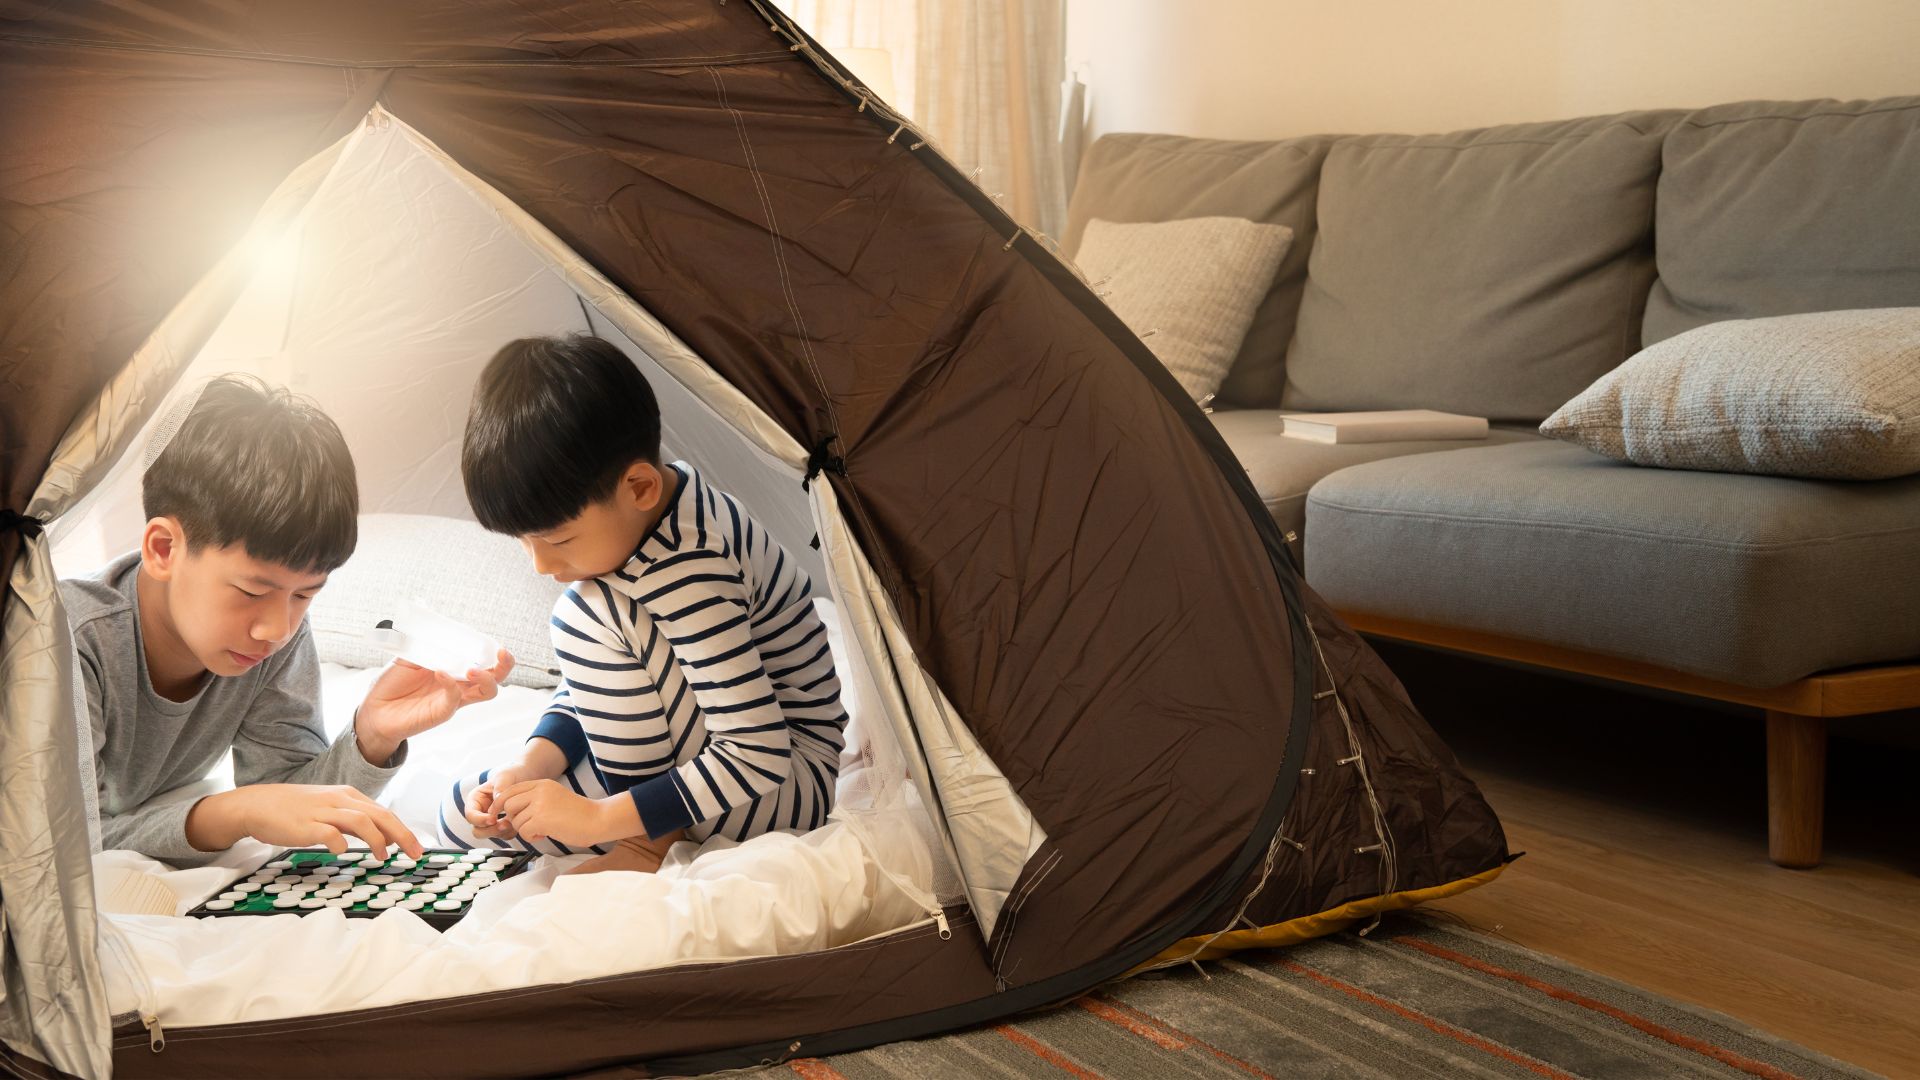 Kids camp at home with an indoor tent set up